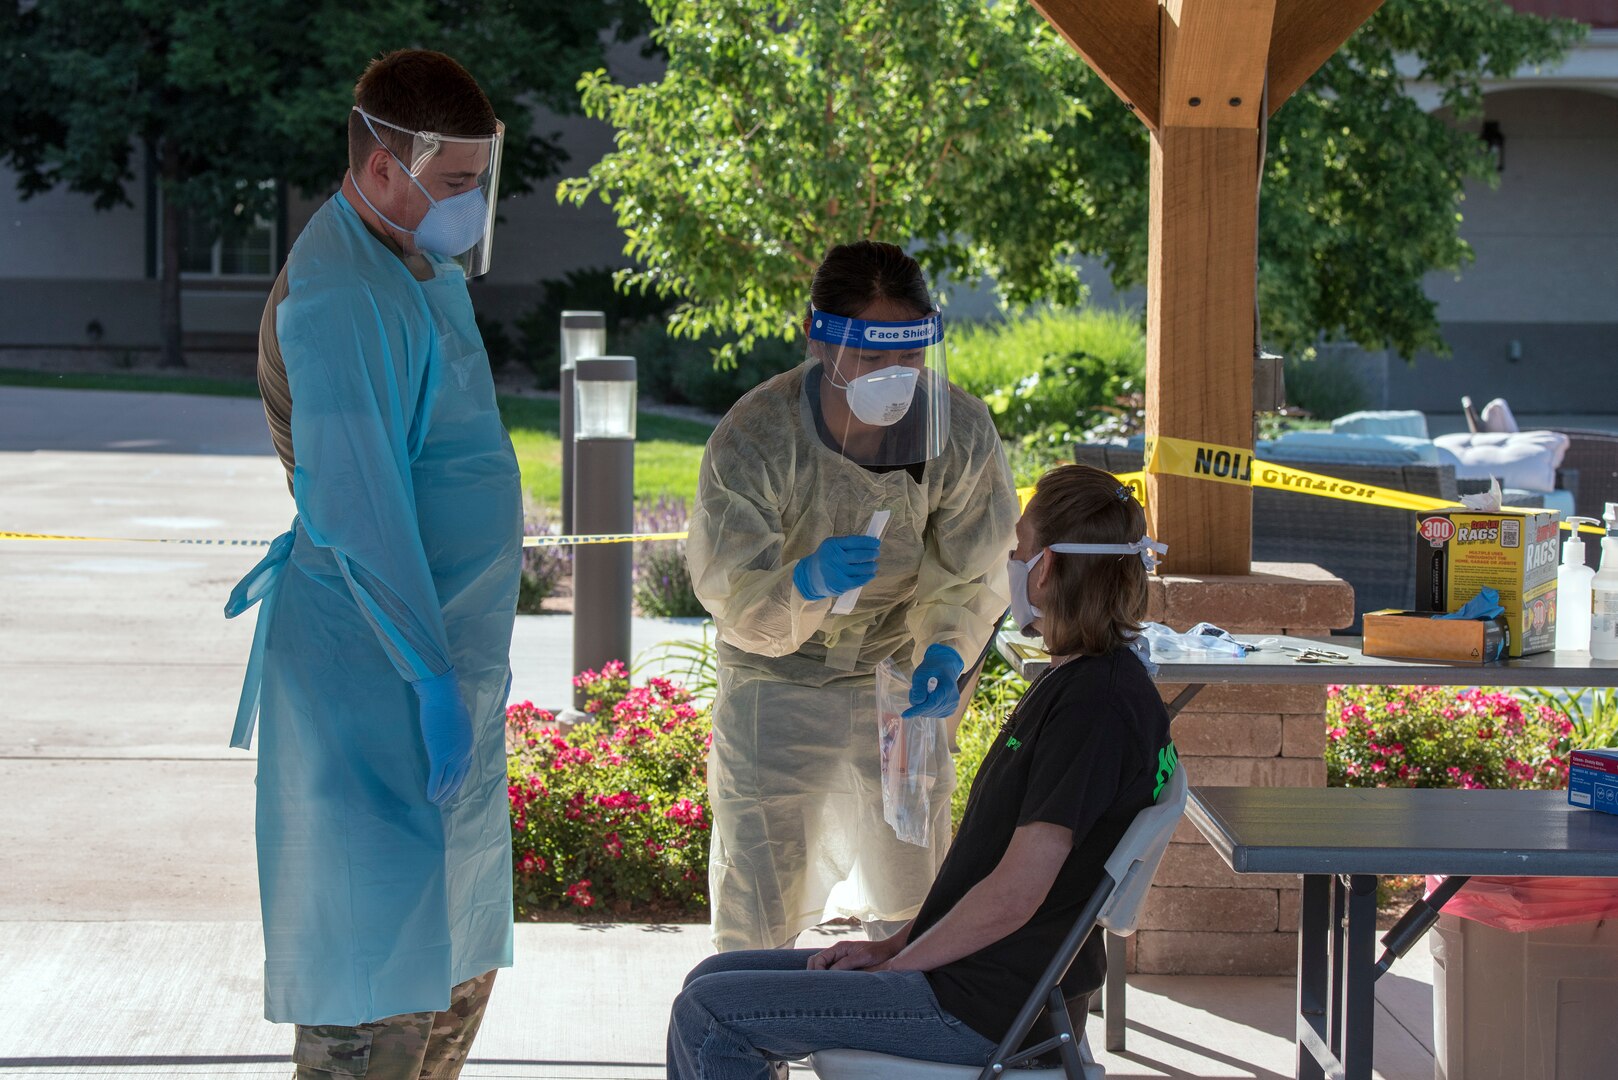 Colorado National Guard Spc. Michael Price, medic, 928th Medical Company (Area Support), instructs nurses at a nursing home in Grand Junction on COVID-19 test procedures June 3, 2020. The Colorado National Guard is increasing COVID-19 testing across Colorado as needed.